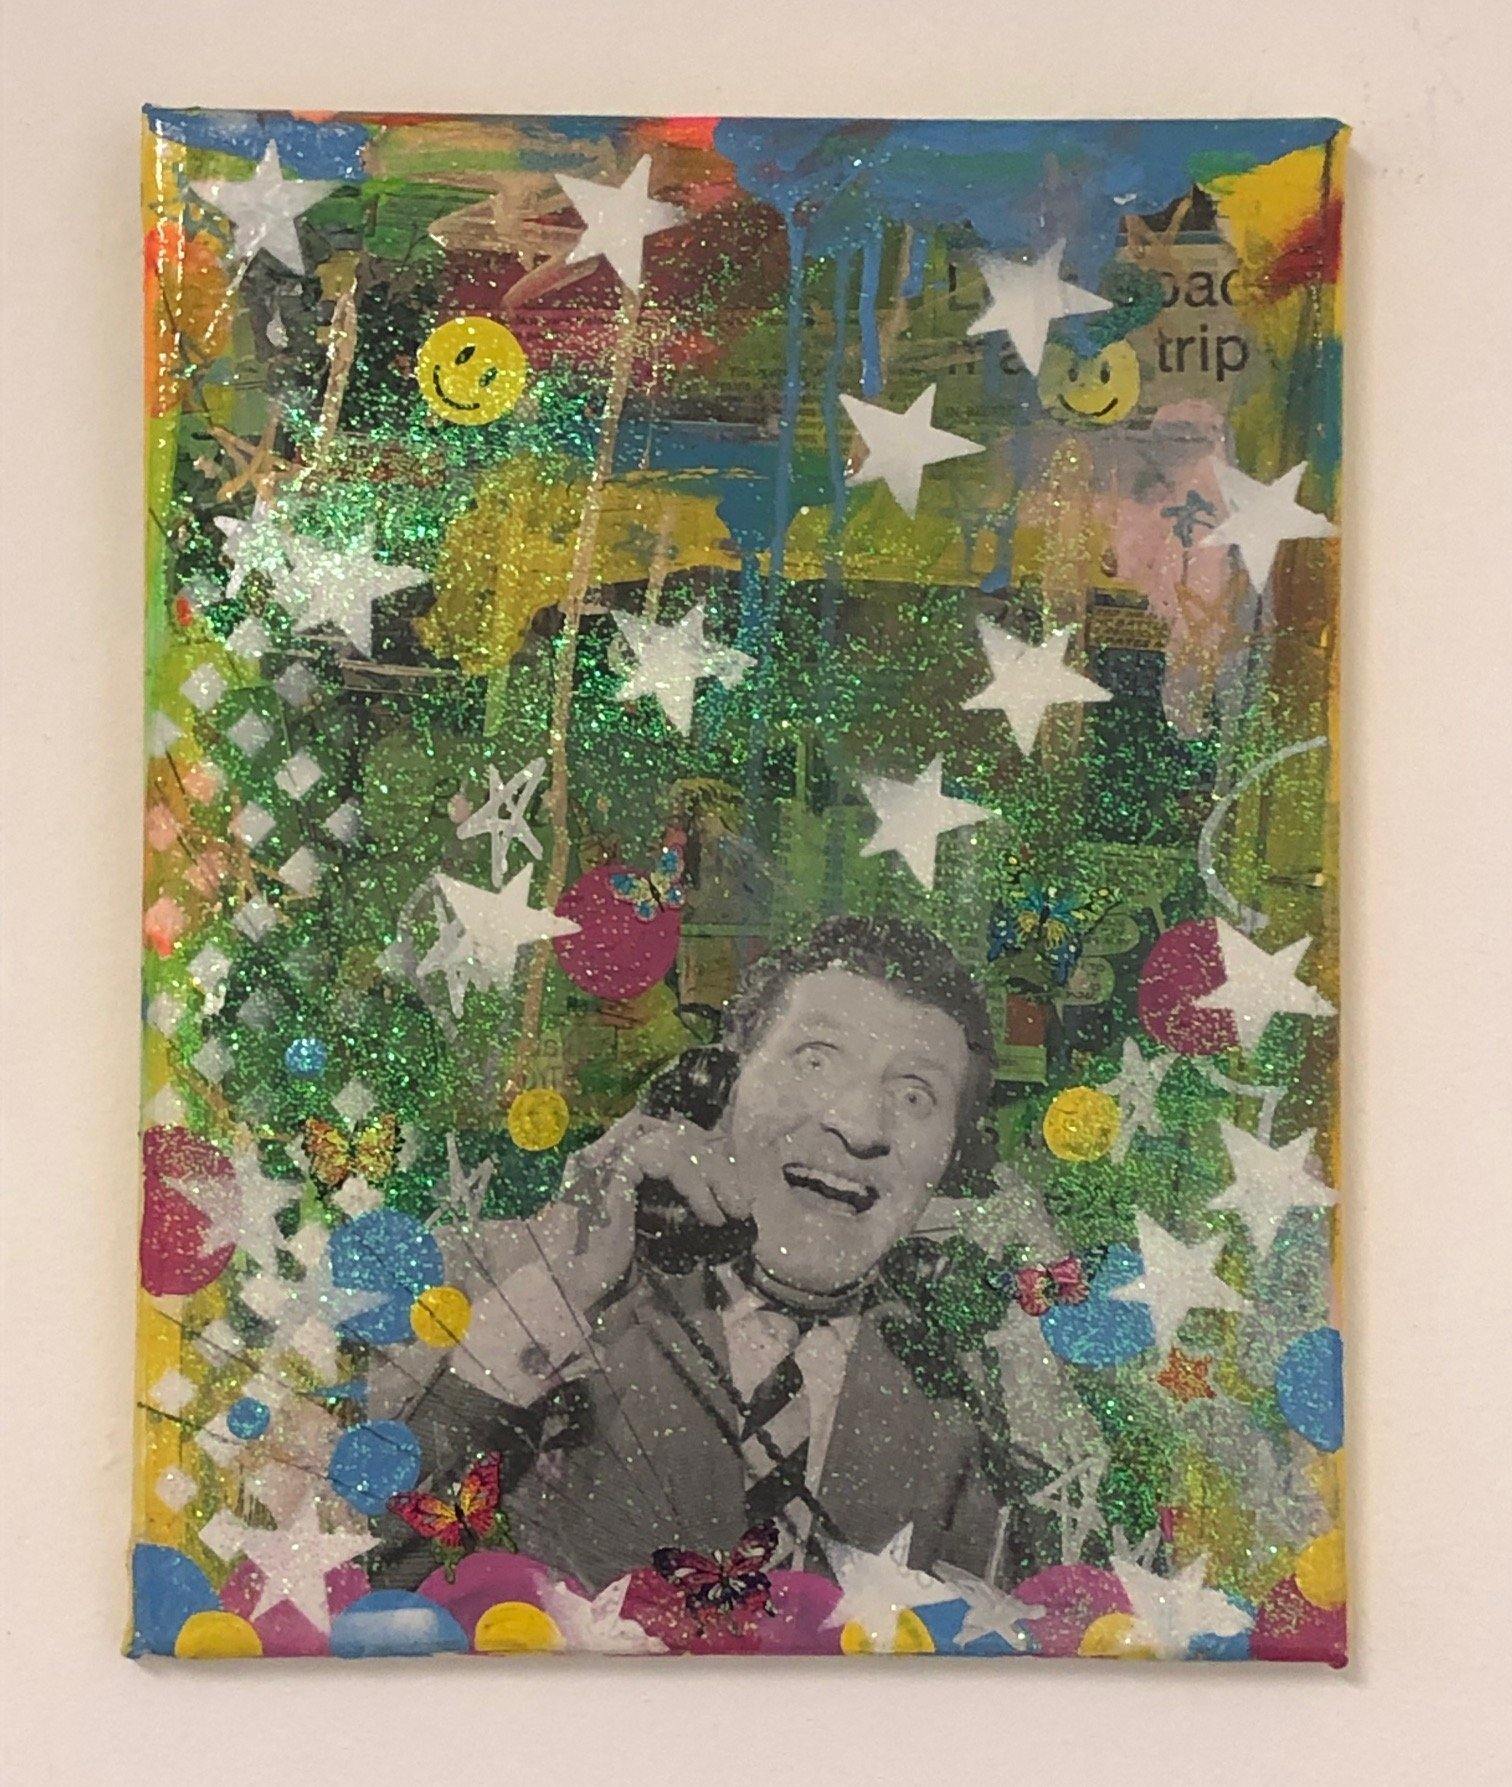 King of the mods by Barrie J Davies 2019, mixed media on canvas, 28cm x 35cm, unframed. Barrie J Davies is an Artist - Pop Art and Street art inspired Artist based in Brighton England UK - Pop Art Paintings, Street Art Prints & Editions available.